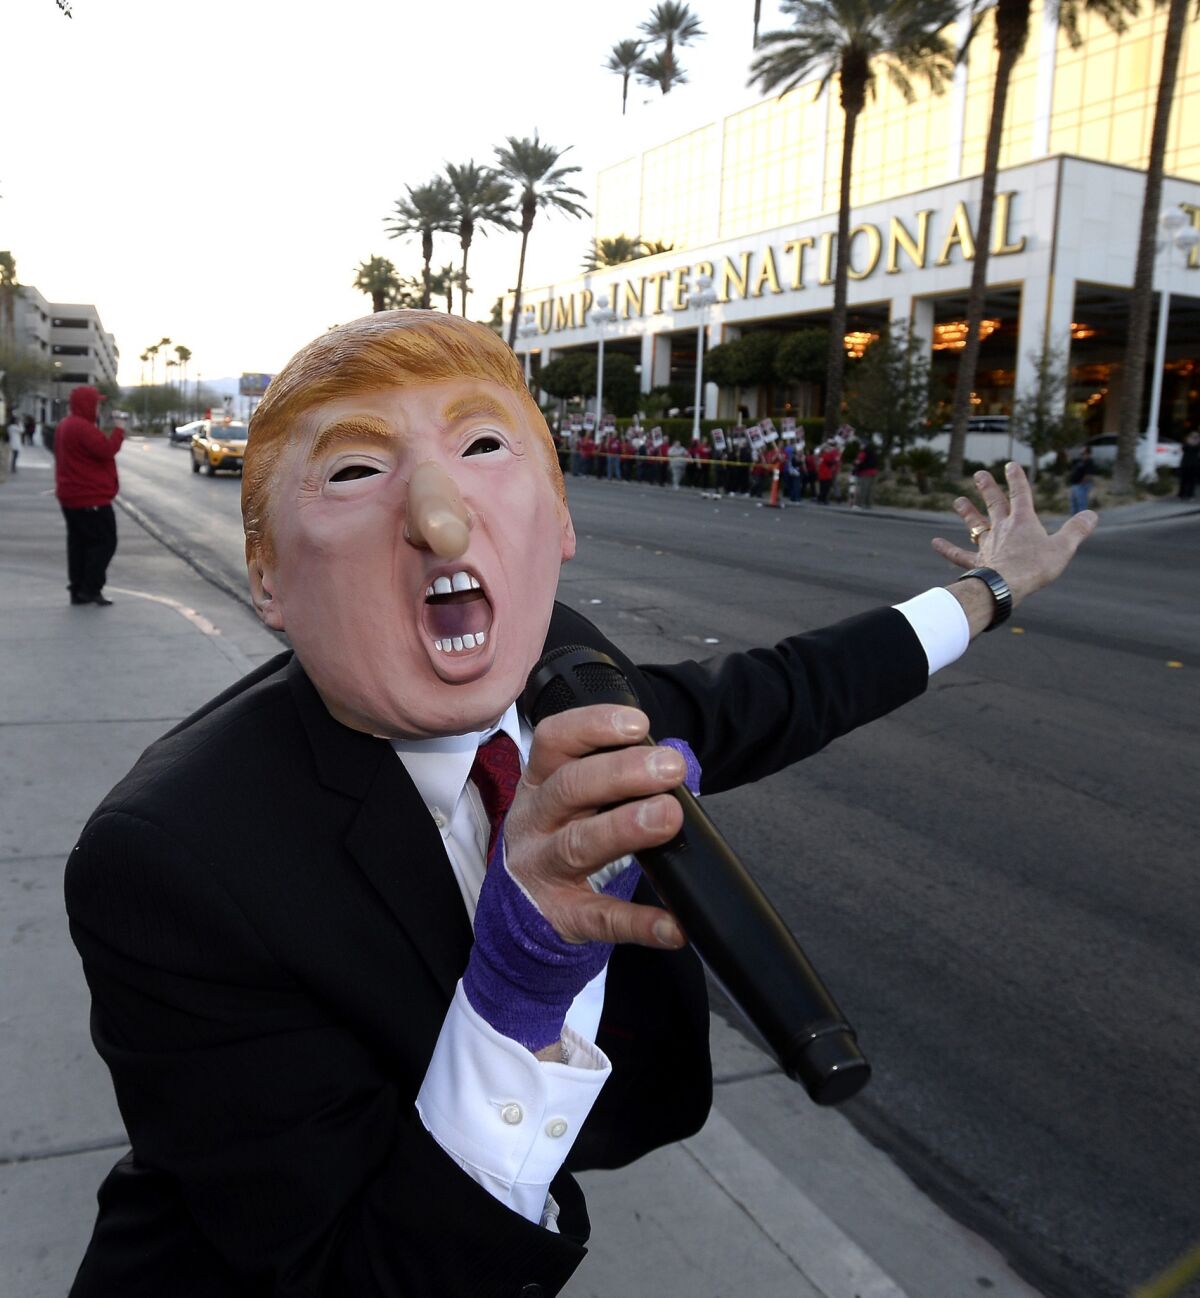 A union member protests outside Donald Trump's hotel in Las Vegas. (Mike Nelson / European Pressphoto Agency)